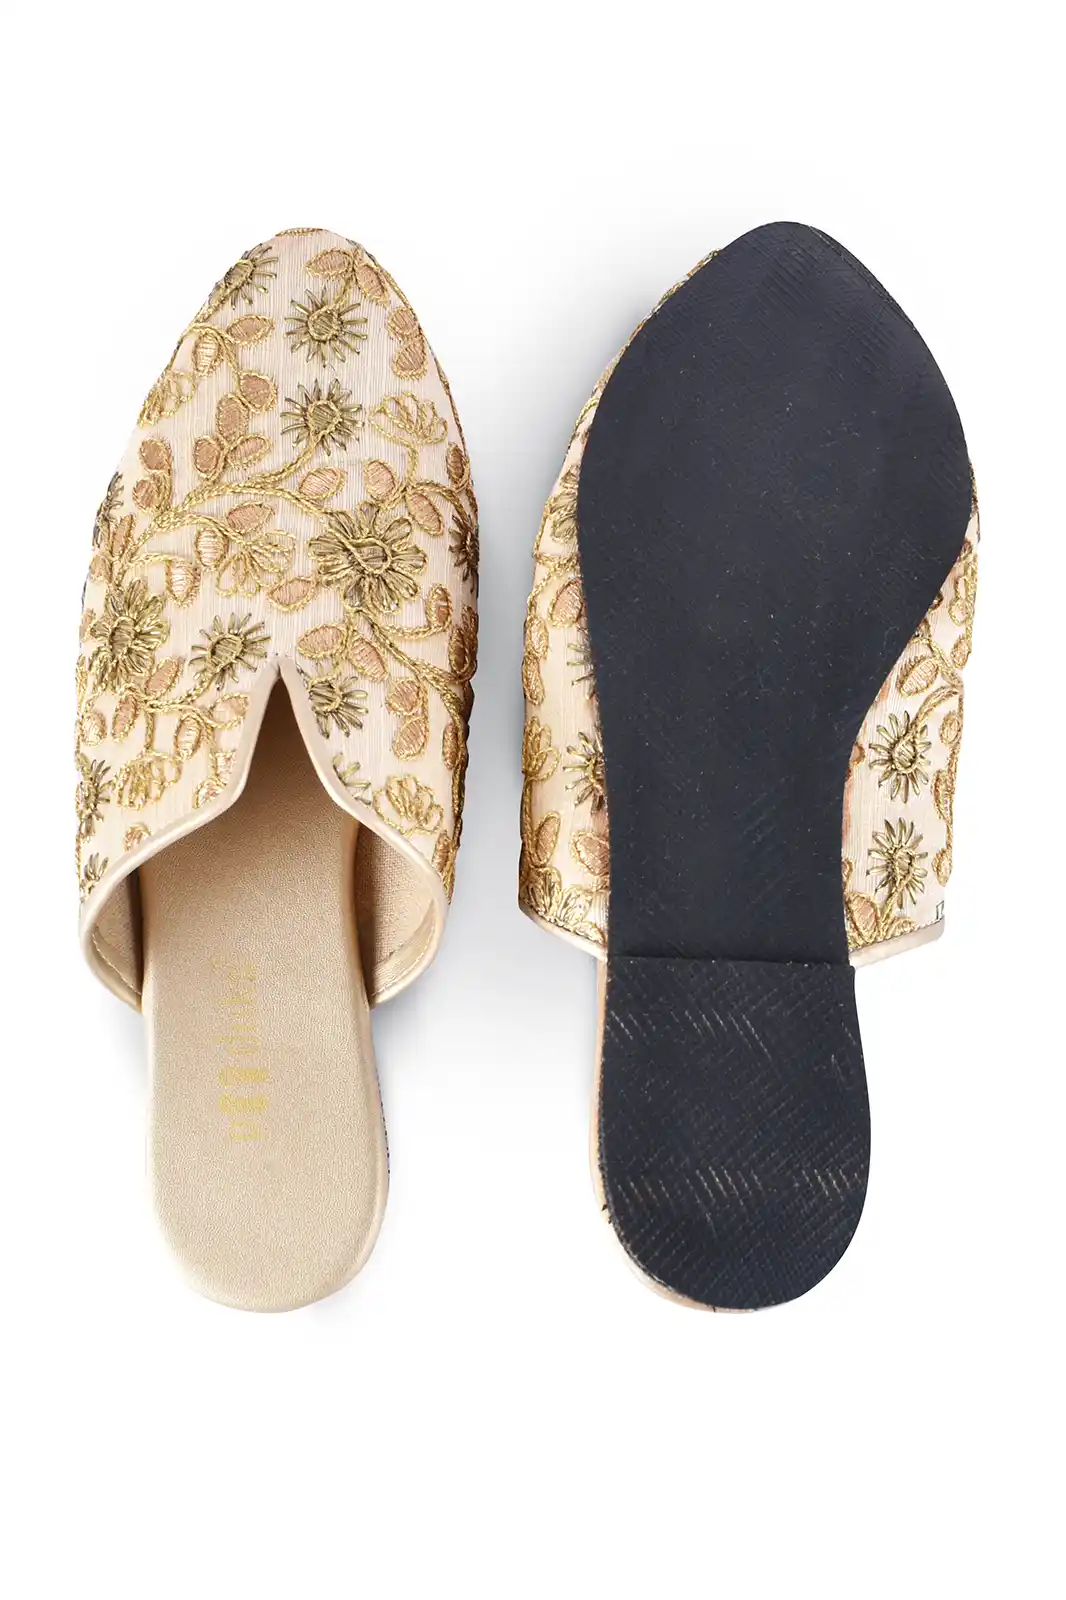 Paaduks Mana Gold Mules Embroidered, womens heels footwears, womens heels sandals, women's heels sandals, high heels sandals, women's heels footwear, flipkart women's footwear heels, high heels wedding sandals, womens sandals heels, women's heel sandals, women's shoe brands, womens sandals crocs, women's shoes online, women's footwear flats, white womens sandals, womens shoes amazon, womens sandals comfort, womens sandals flipkart, women's trending shoes, women's sandals brands, womens footwear online, organic footwear, vegan footwear india, vegan shoes in india, vegan shoes india, best brand for women's sandals in india, best women's sandals brands, eco friendly footwear brands in india, vegan shoes brands in india